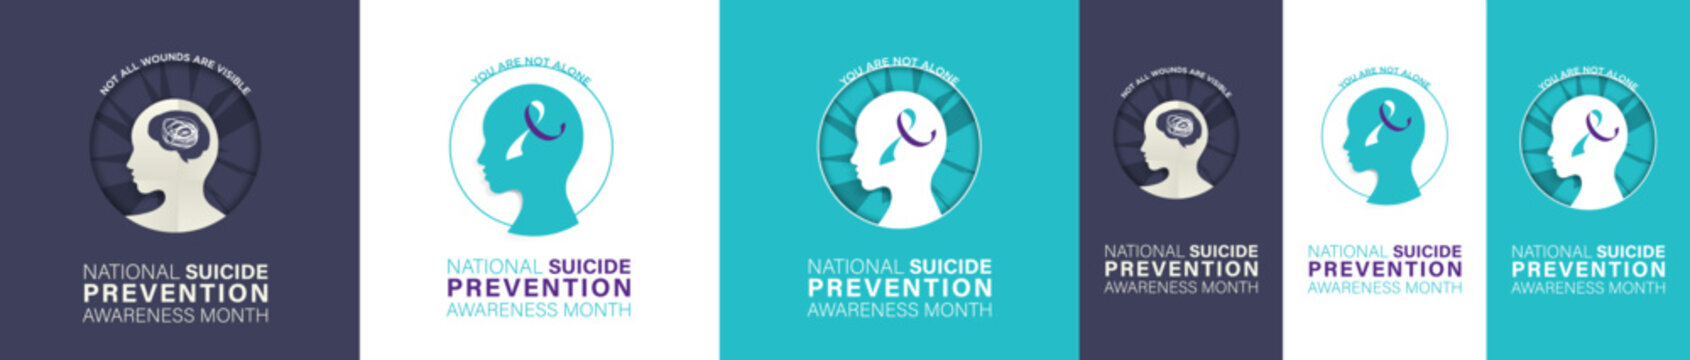 Set of National Suicide Prevention Awareness Month Greeting Cards and Story posters. Head and awareness ribbon concept. Editable Vector Illustration. EPS 10.